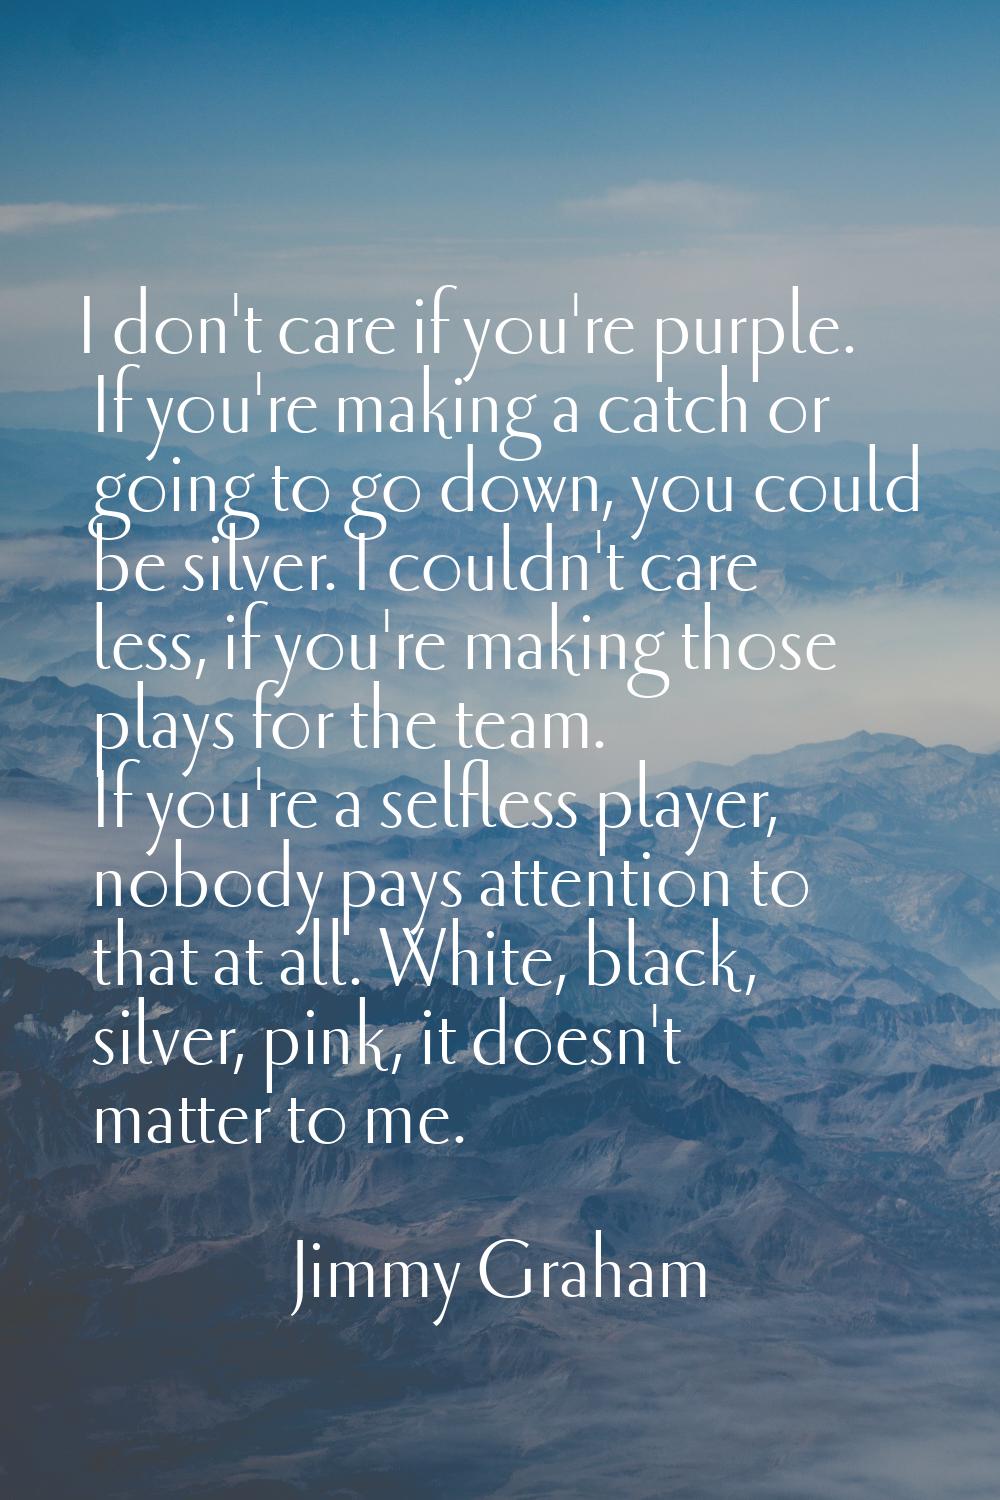 I don't care if you're purple. If you're making a catch or going to go down, you could be silver. I